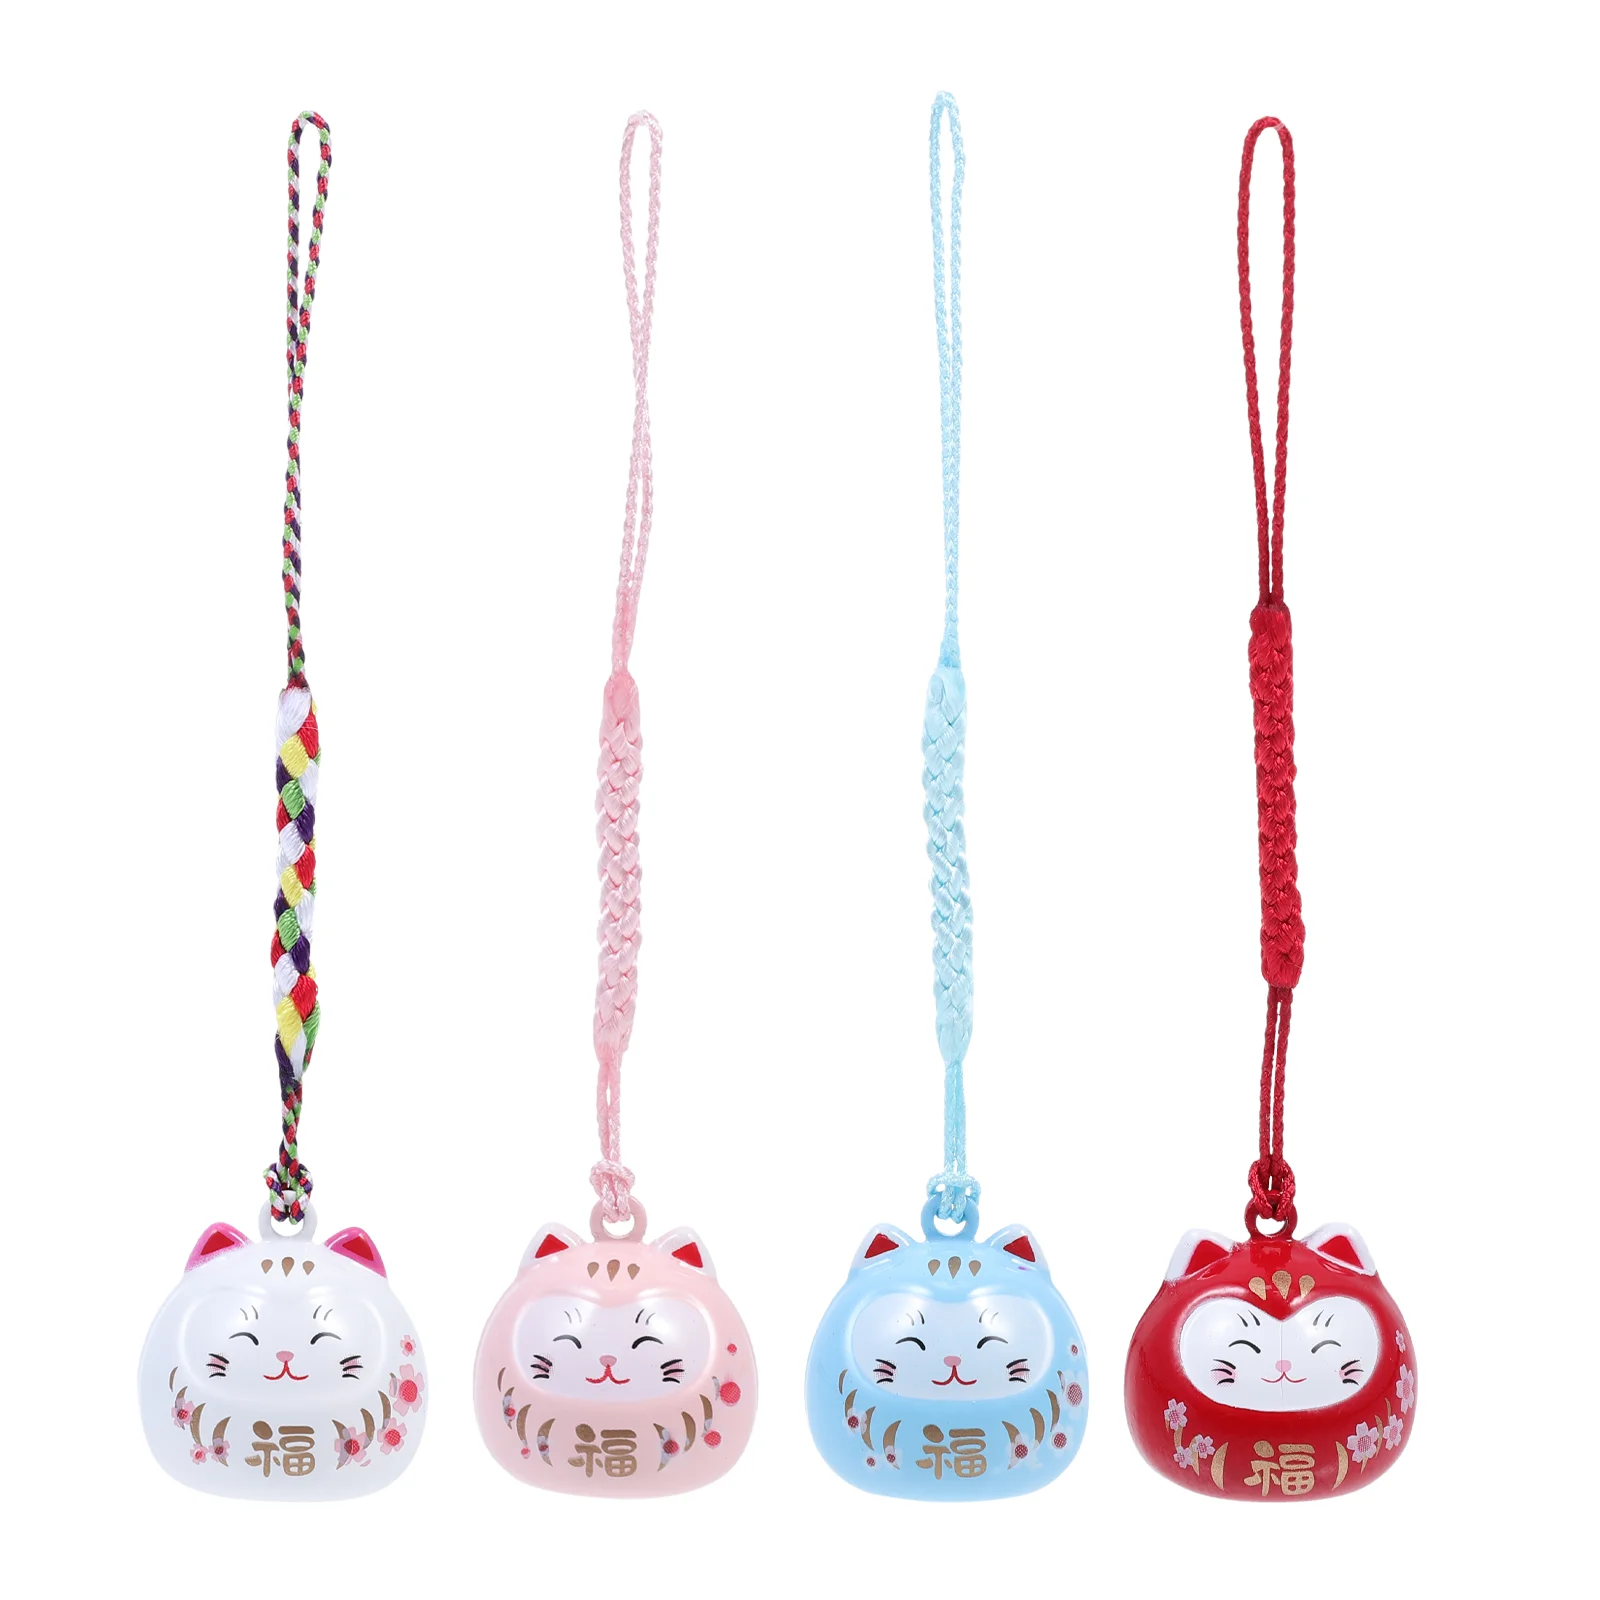 

Pendant Phone Decor Strap Cat Cellphone Hanging Keychain Bag Lanyard Wrist Charms Fortune Creative Chain Wealth Mascot Luck Car